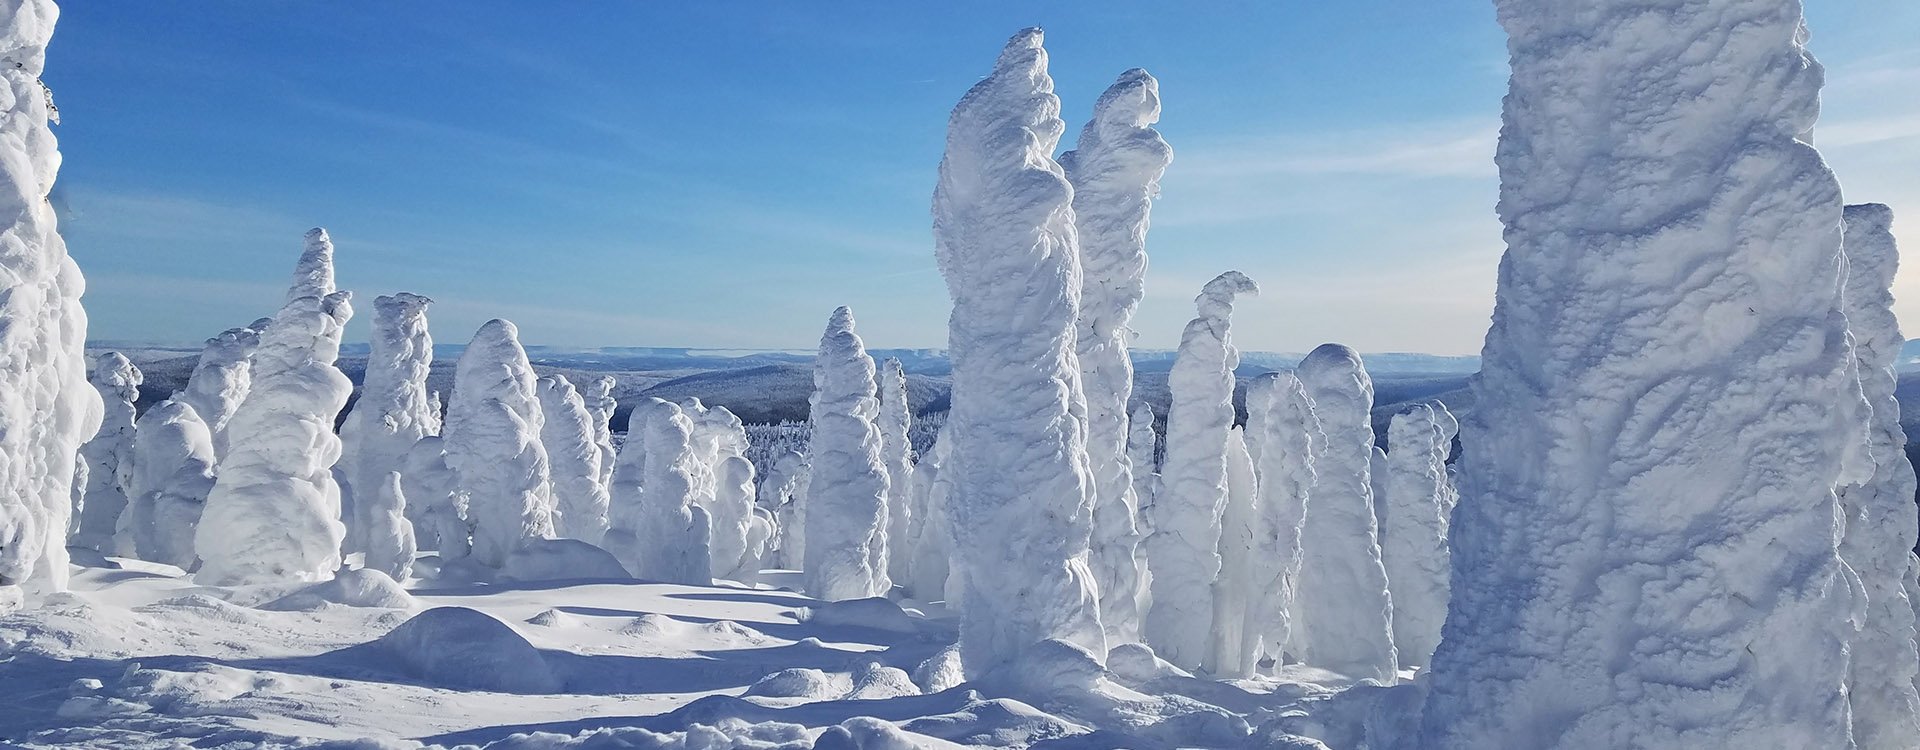 The Enchanted Forest of the Arctic Circle, Alaska; Unusual Snow Covered Tree Forest/Landscape